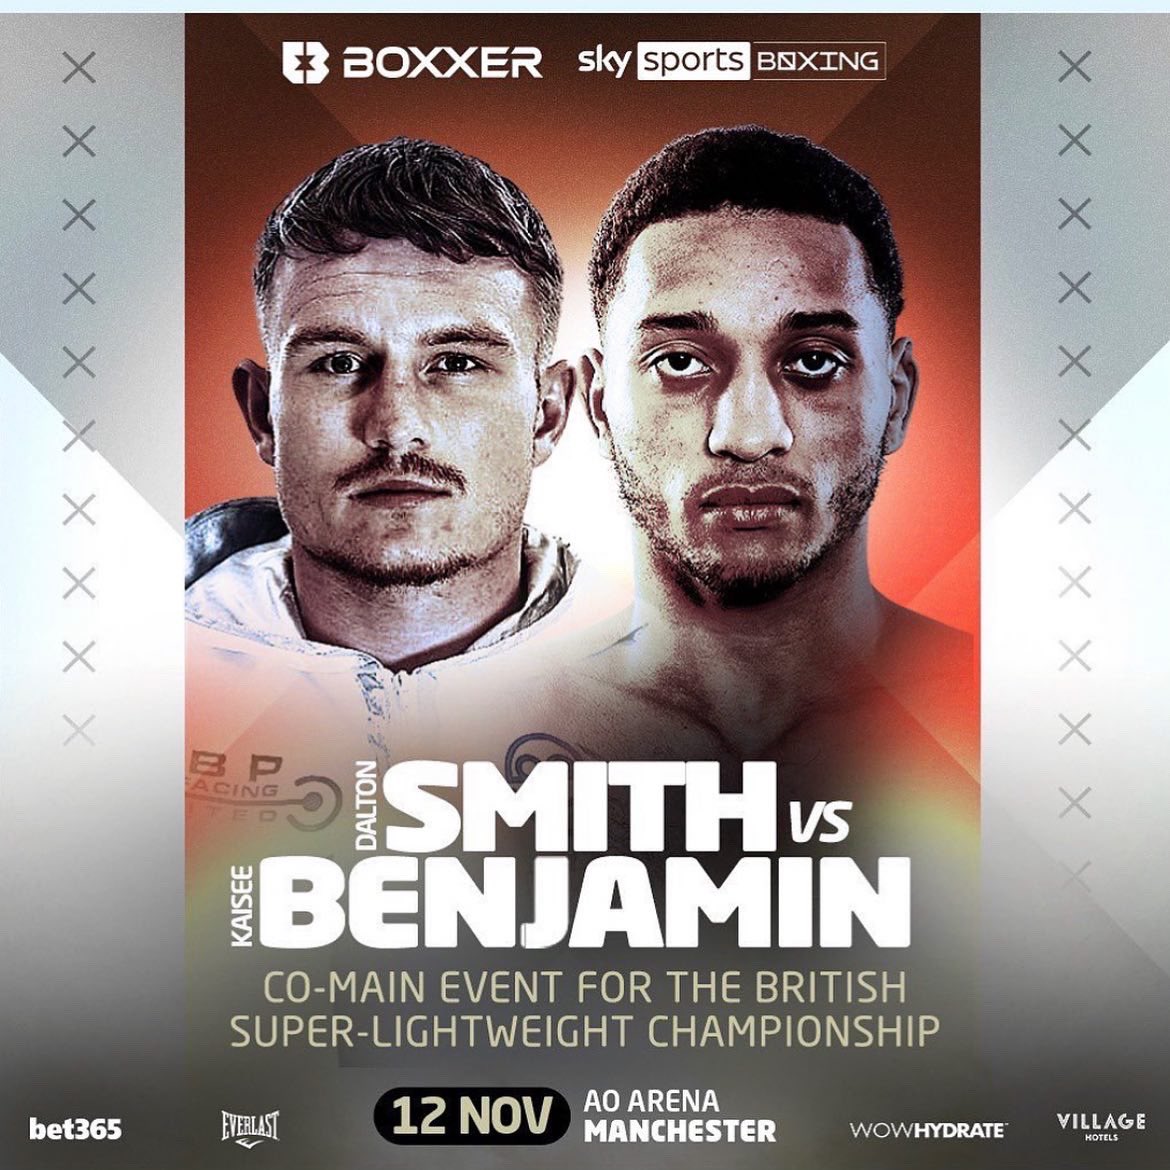 Tickets available for @daltonsmith08 1st defence of the British Title 🥊🇬🇧Saturday 12th November we hit Manchester! Let’s Go ⚡️🔥💥 #SmithBenjamin #thunder #andstill DM to purchase 📲 £300 (VIP bar + ringside) £250ringside £150 £100 £75 £50 All plus £2.50 fee from the arena